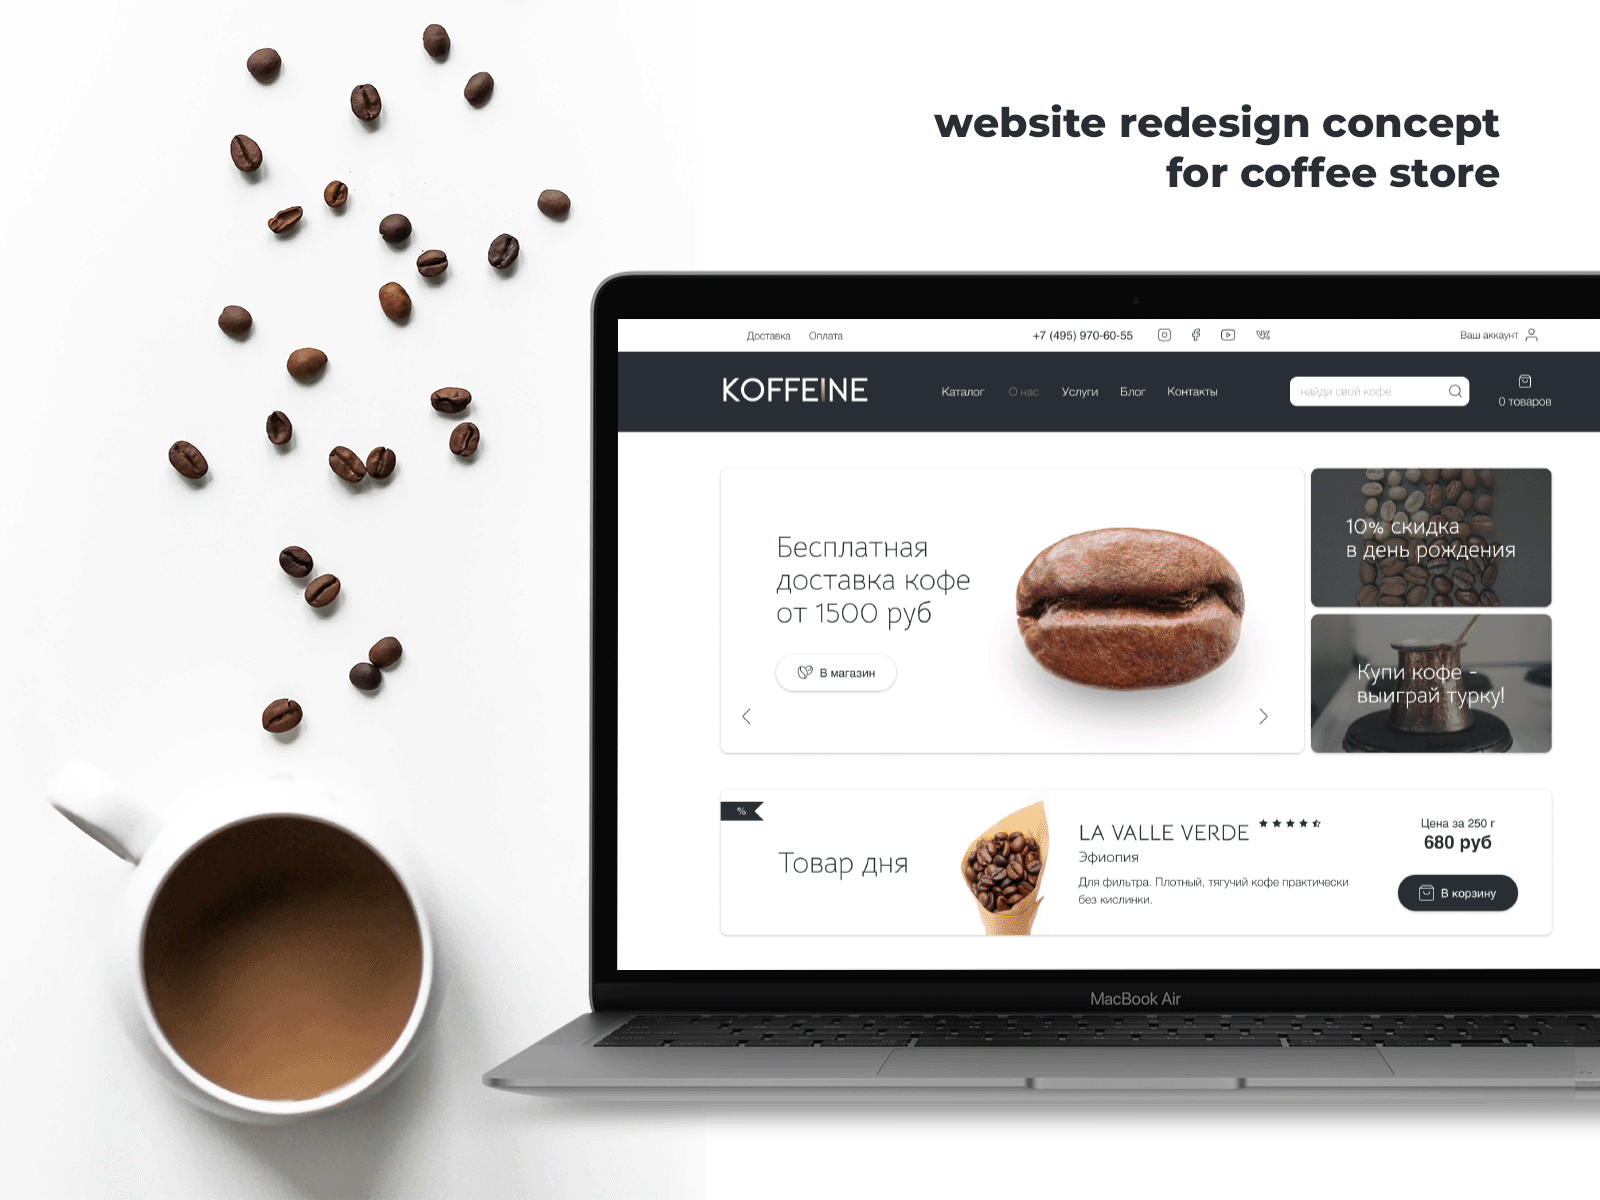 Website redesign concept for coffee store